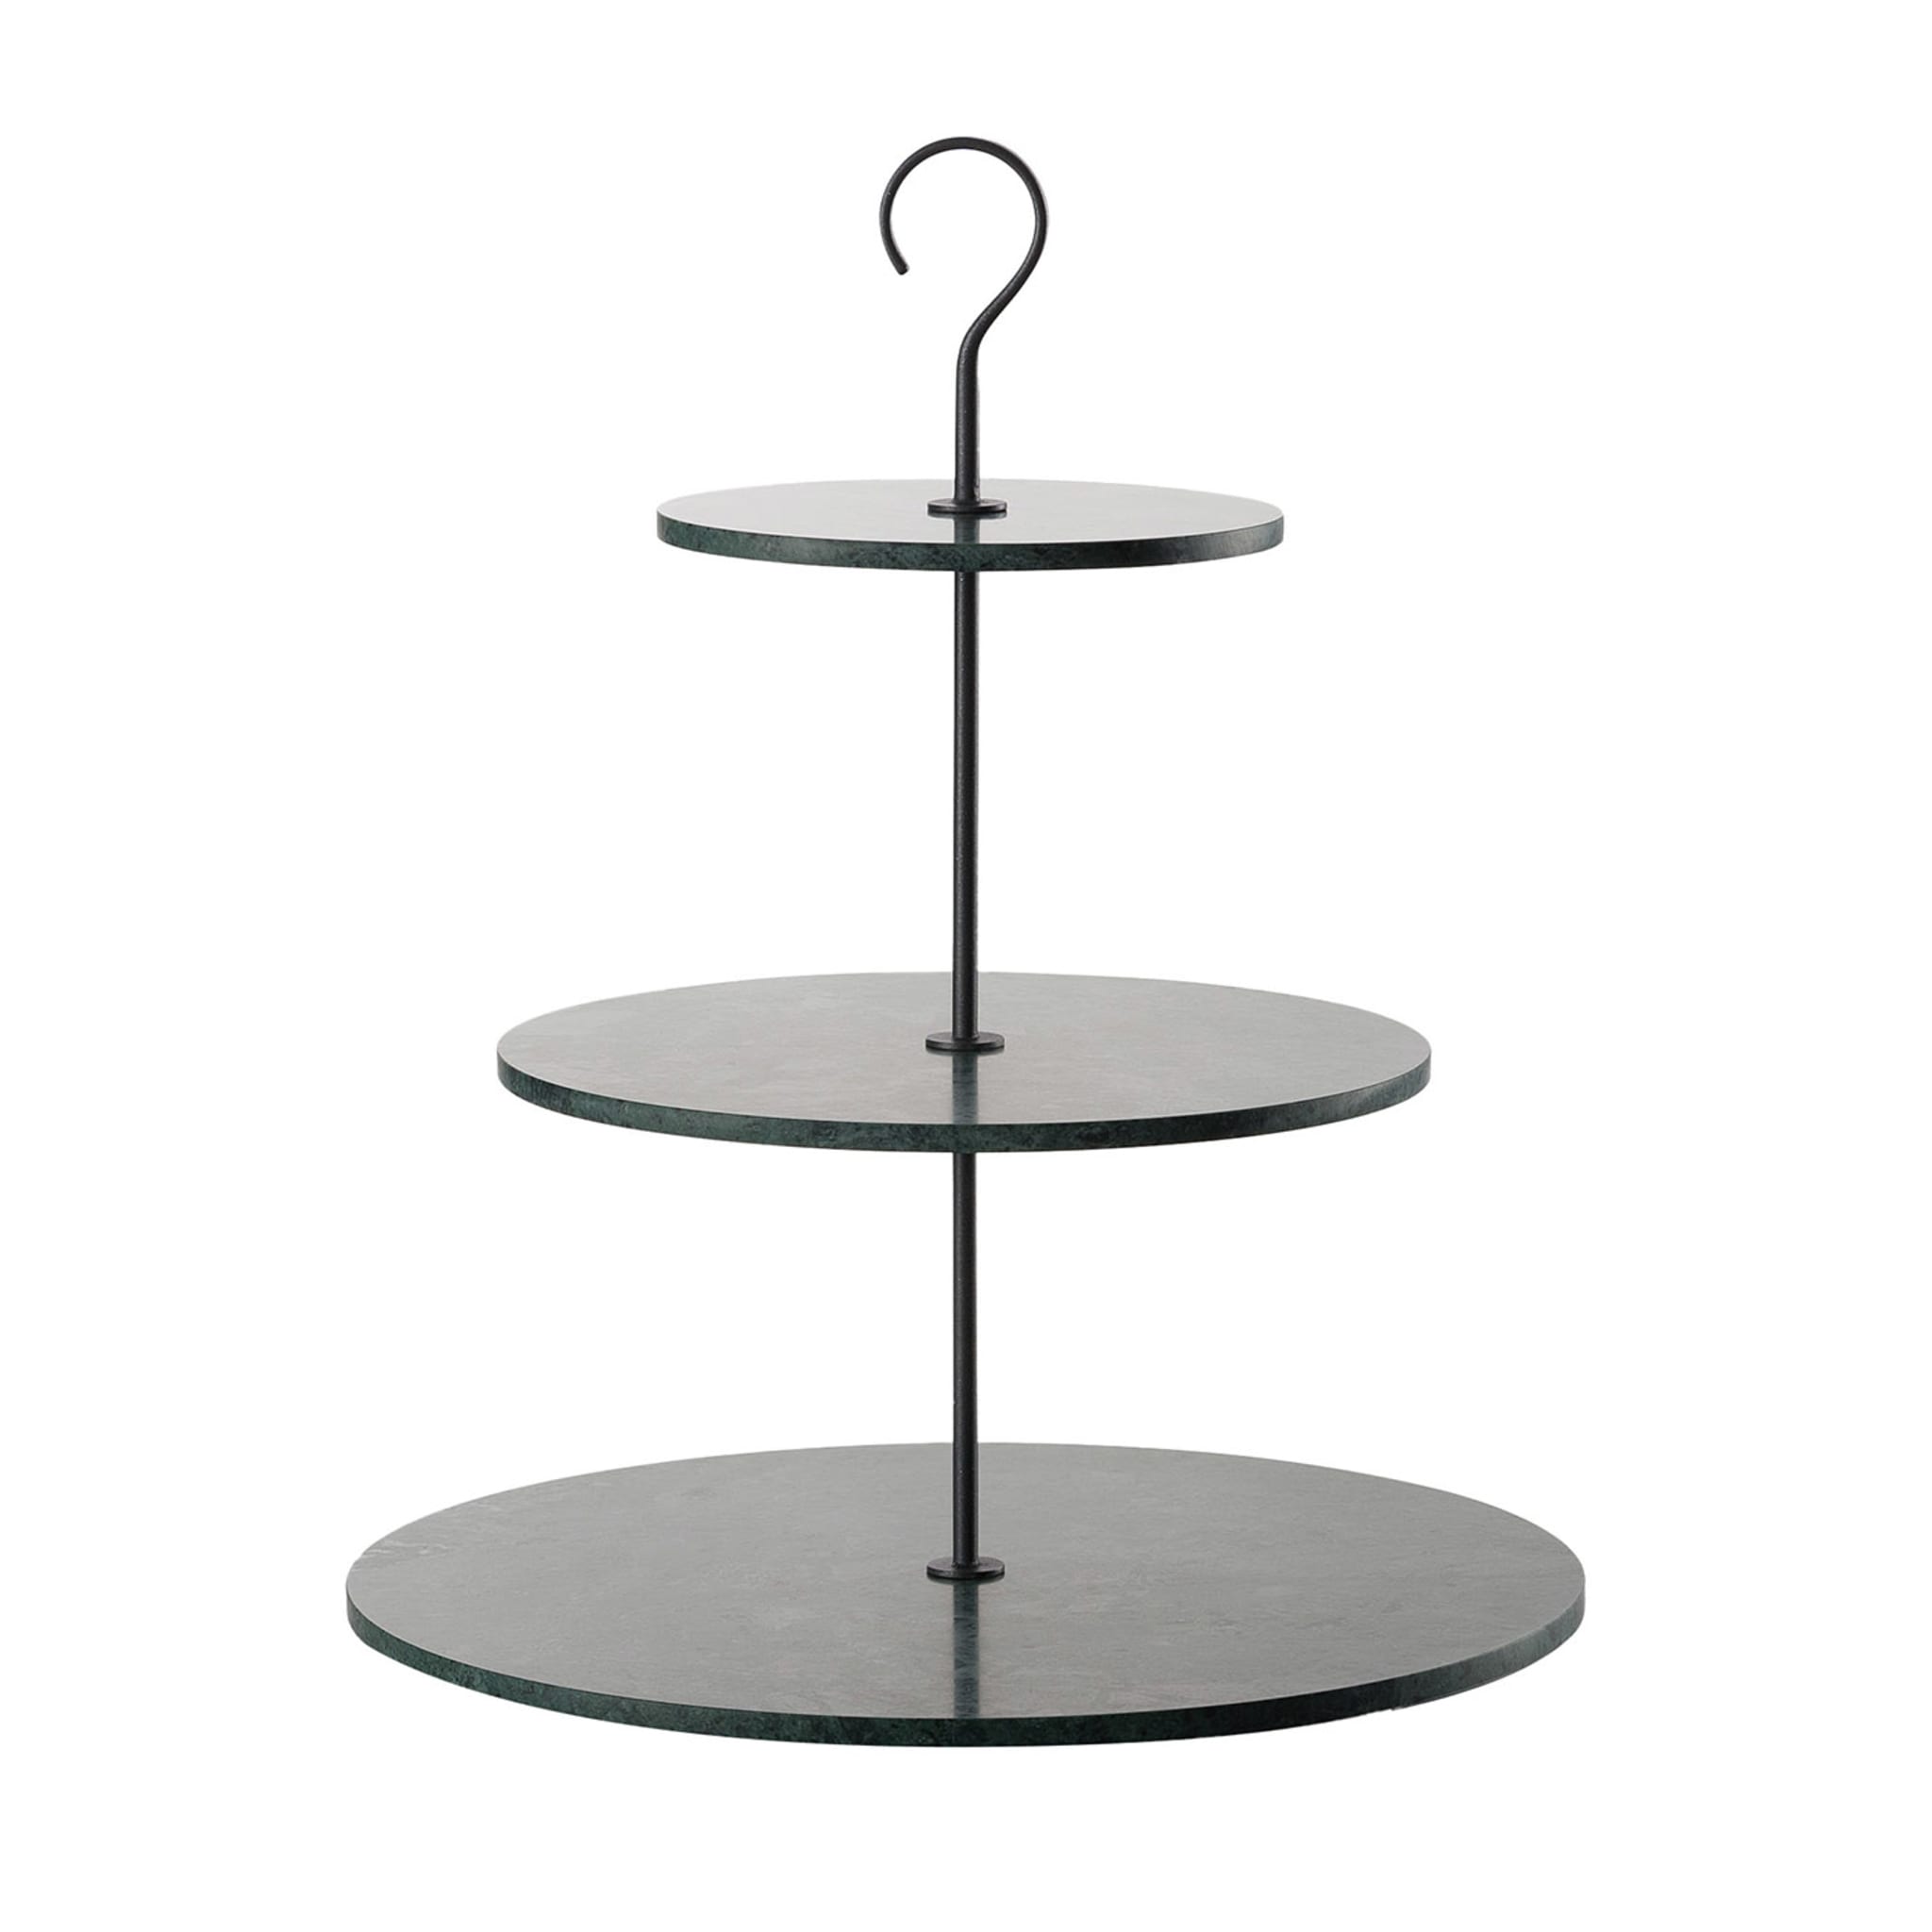 Pietra L12 Green Marble Cake Stand by Piero Lissoni - Main view